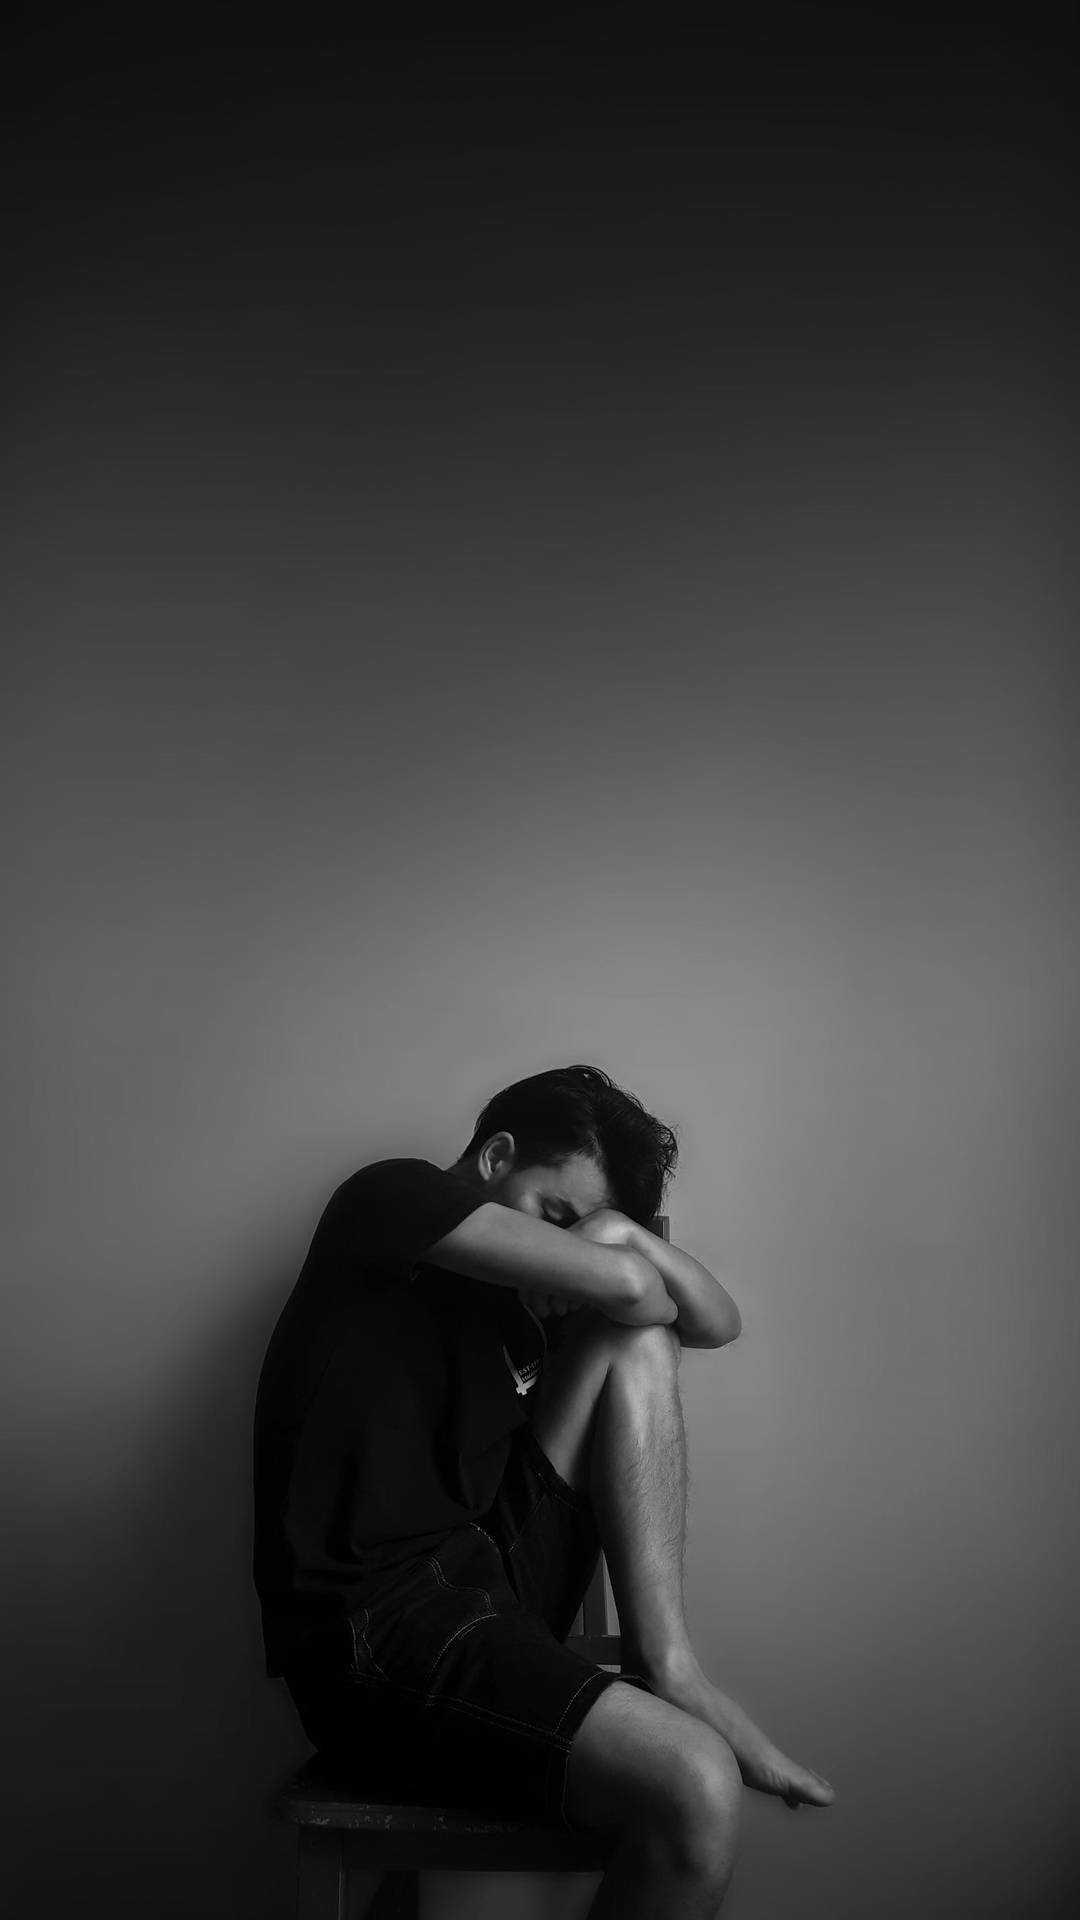 Lonely Man Leaning Against A Wall Background